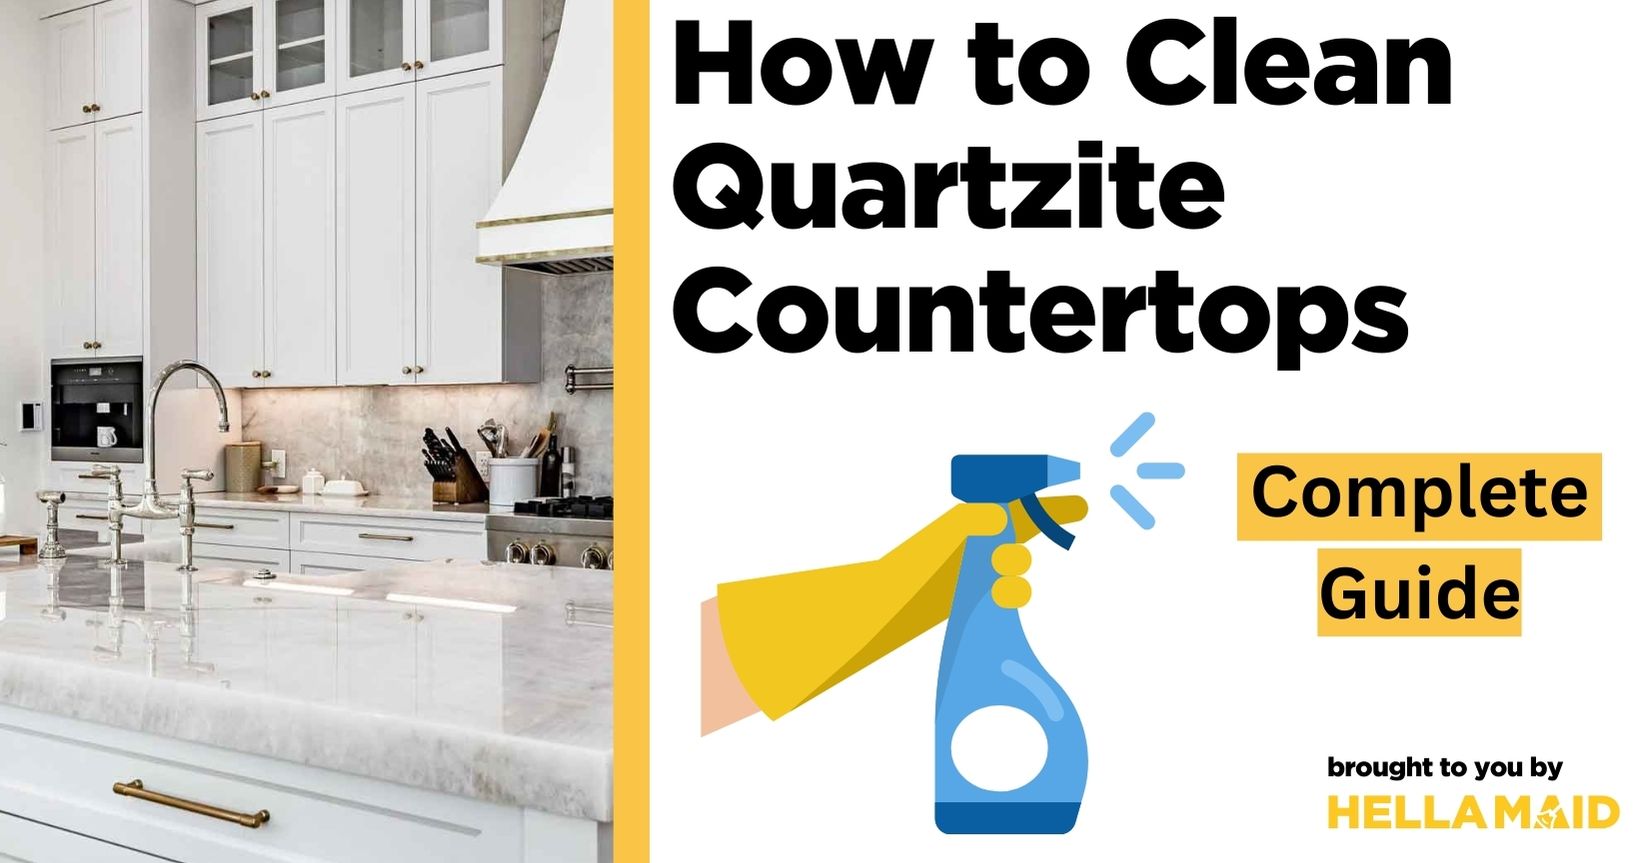 How To Clean Quartz Countertops, Complete Guide